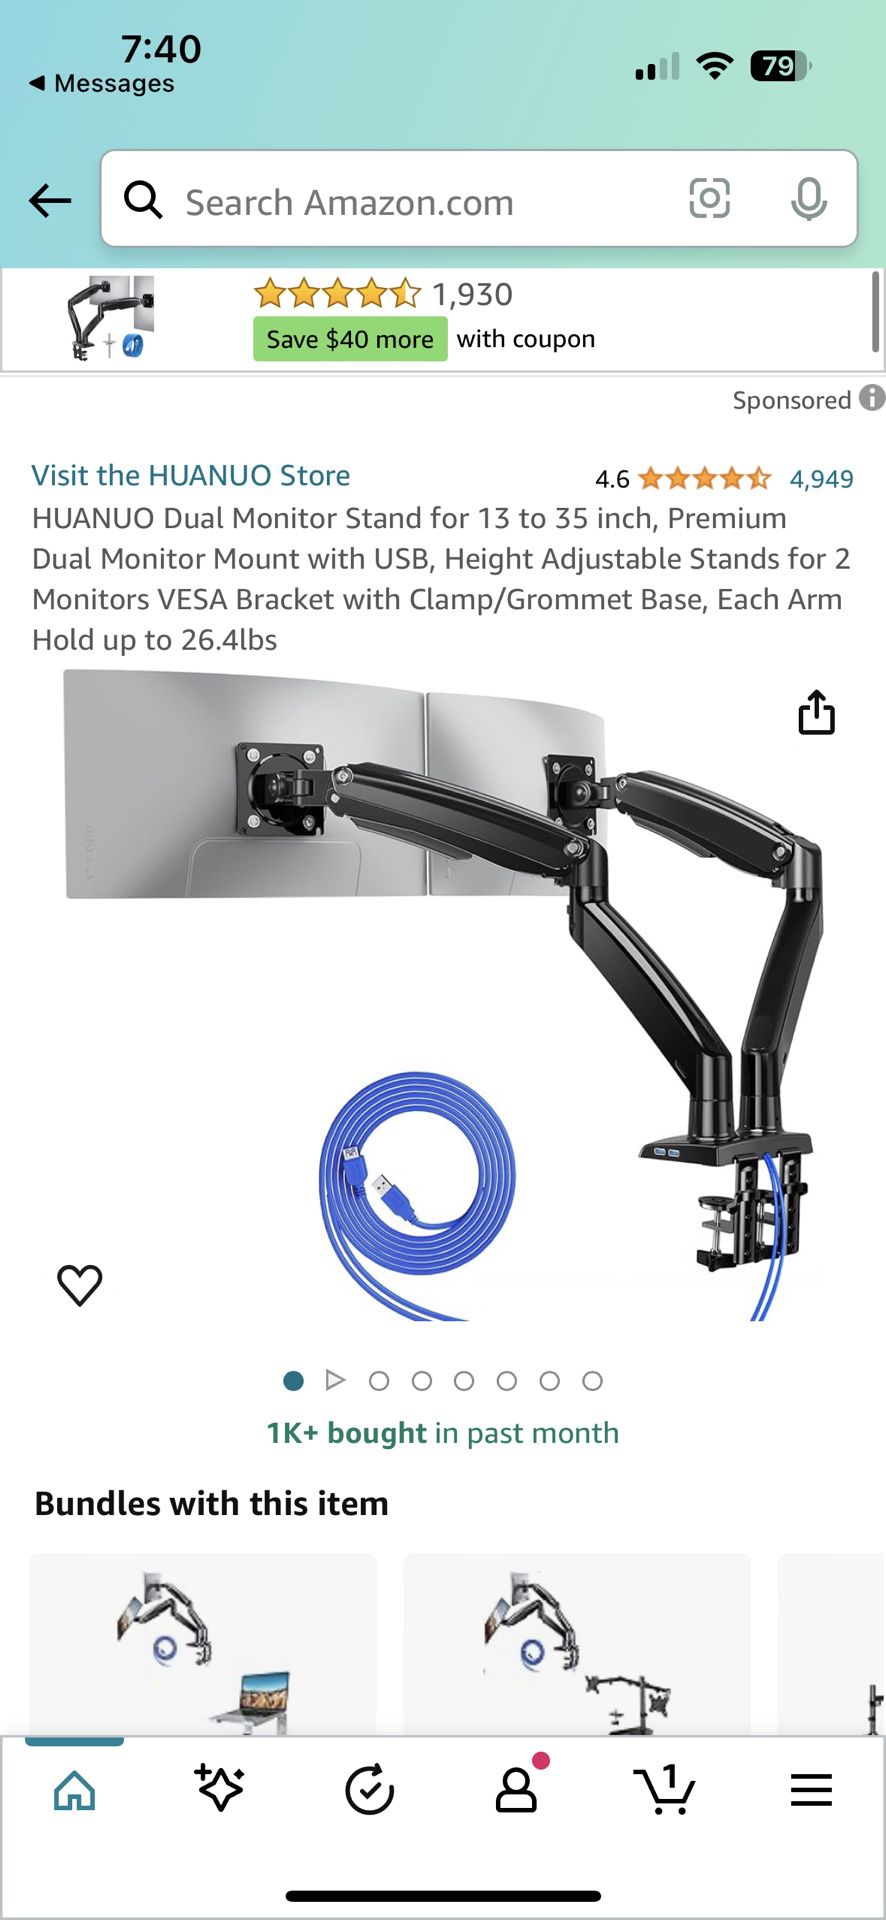 HUANUO Dual Monitor Stand for 13 to 35 inch